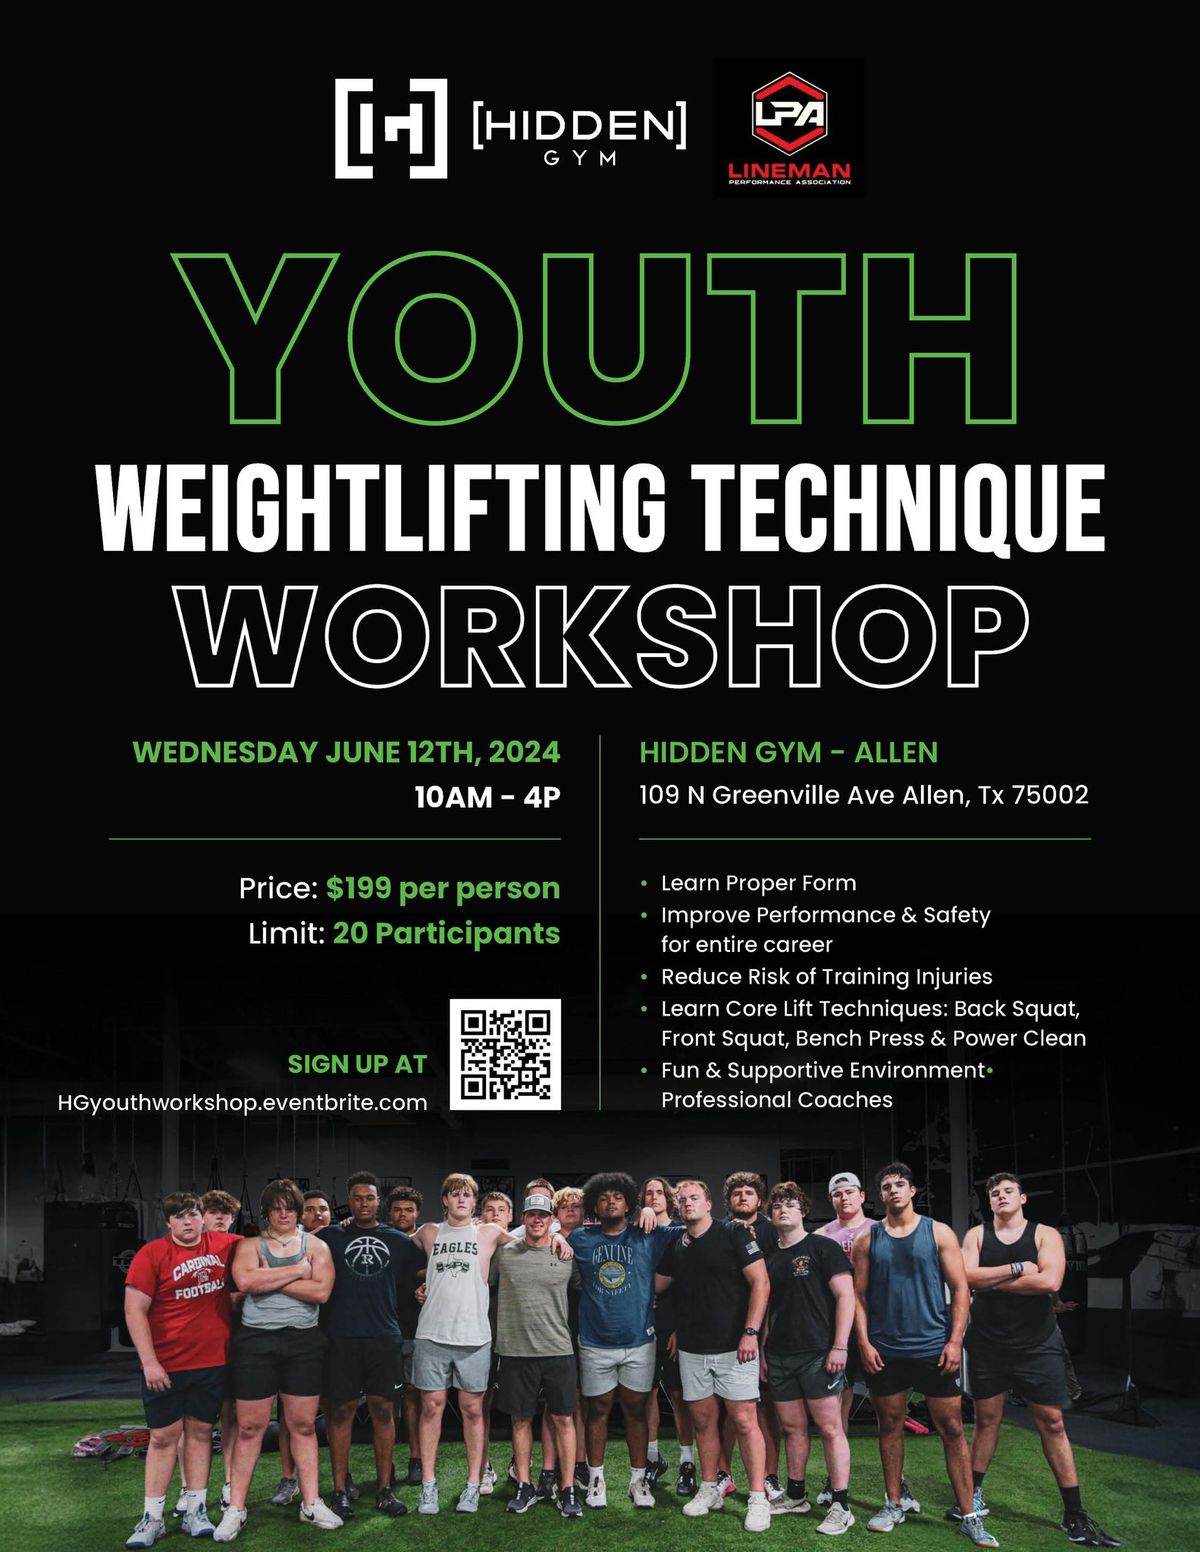 Youth Weightlifting Technique Workshop